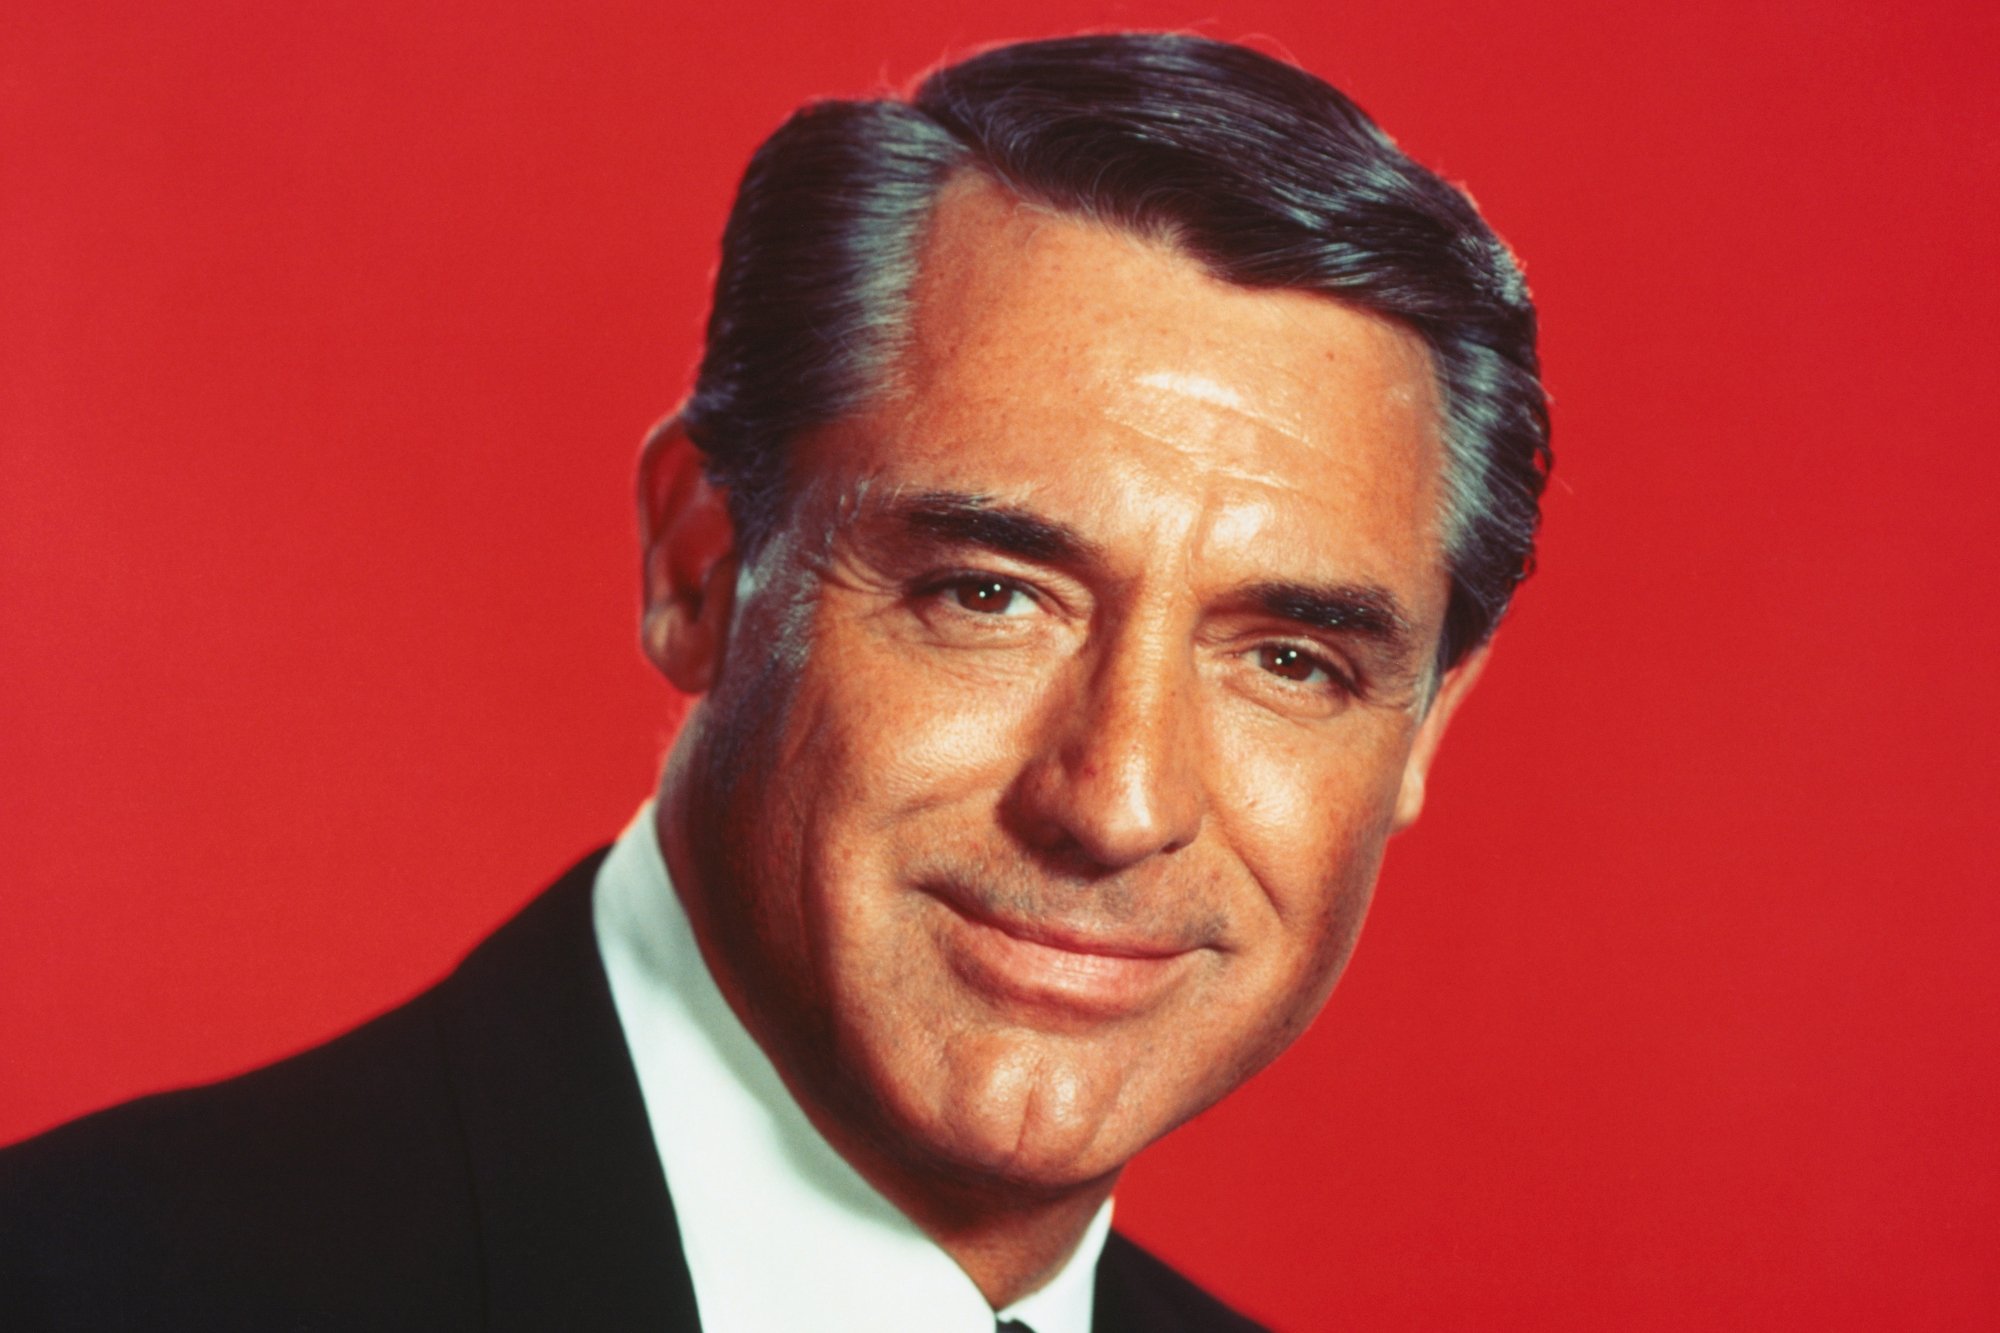 Cary Grant, who turned down 'Bridge on the River Kwai'. He's wearing a suit with a closed mouth smile in front of a solid red background.